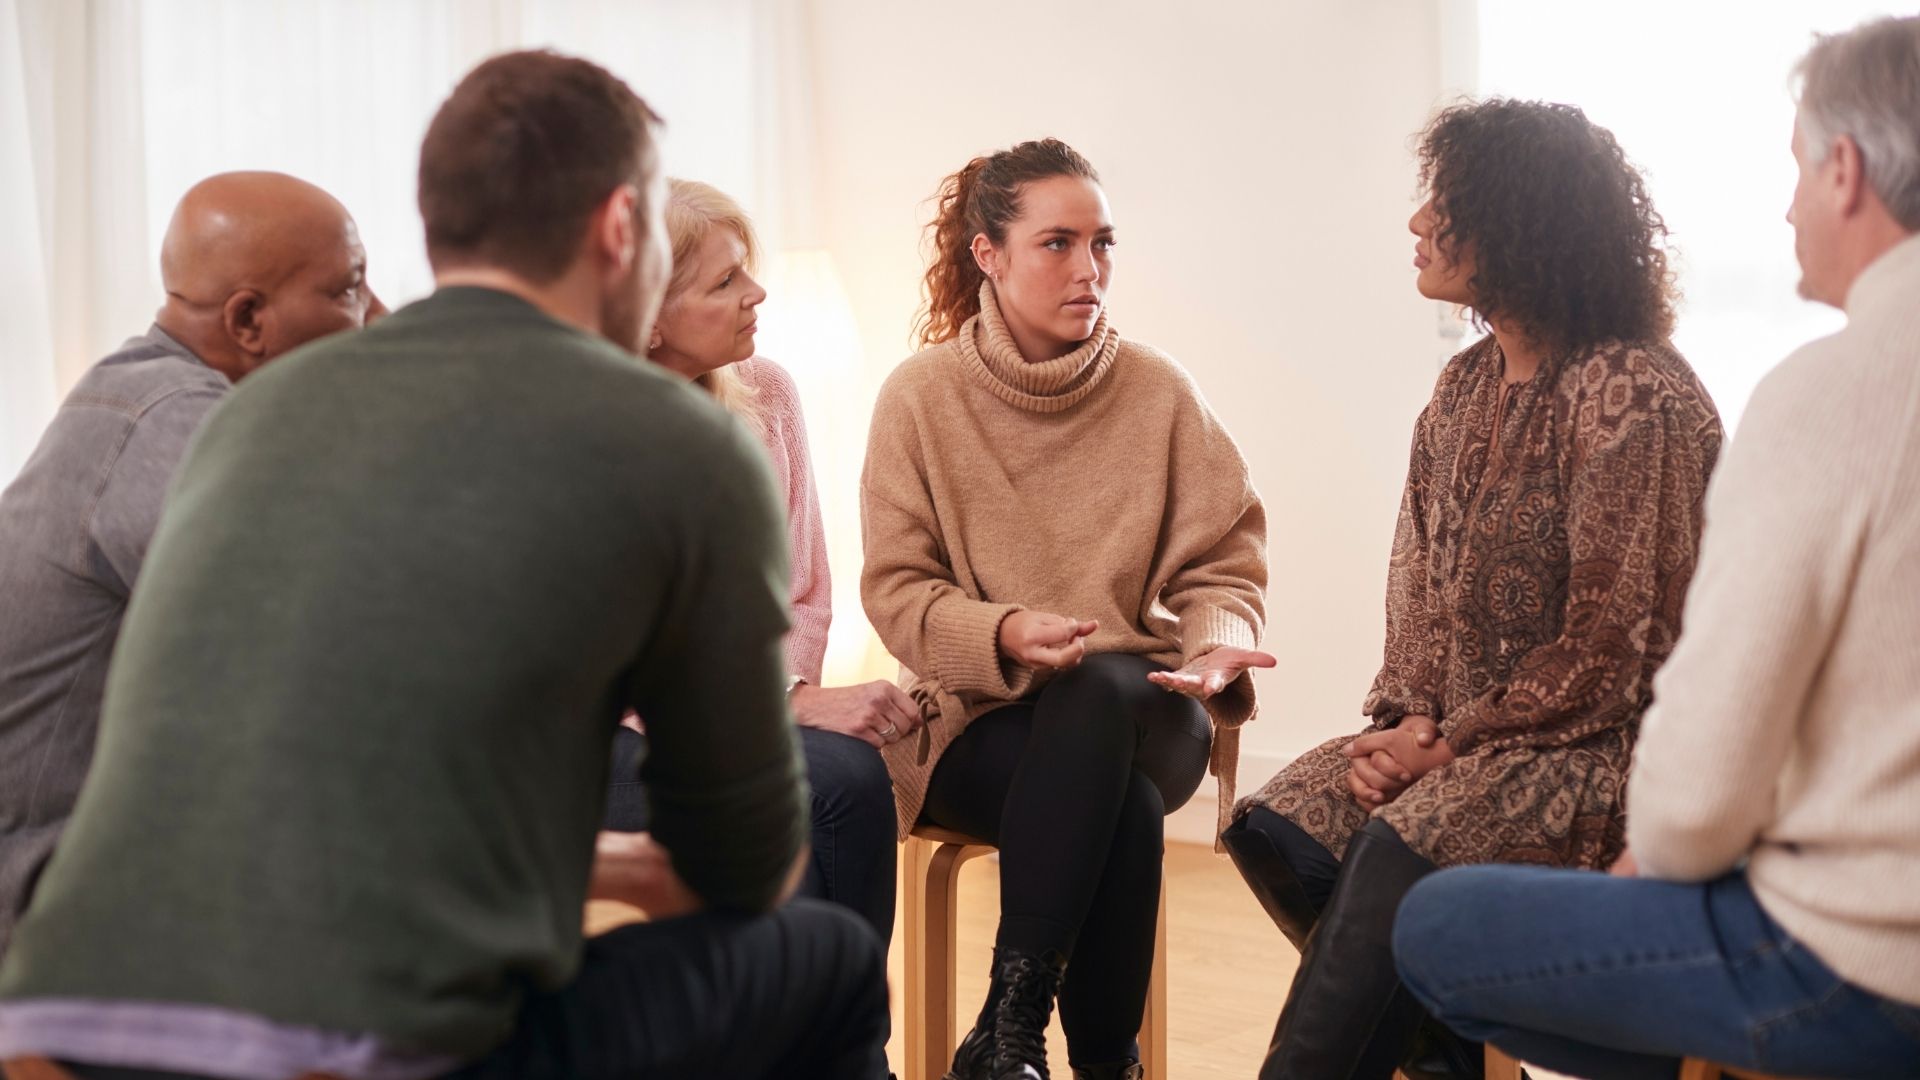 Group Therapy Support